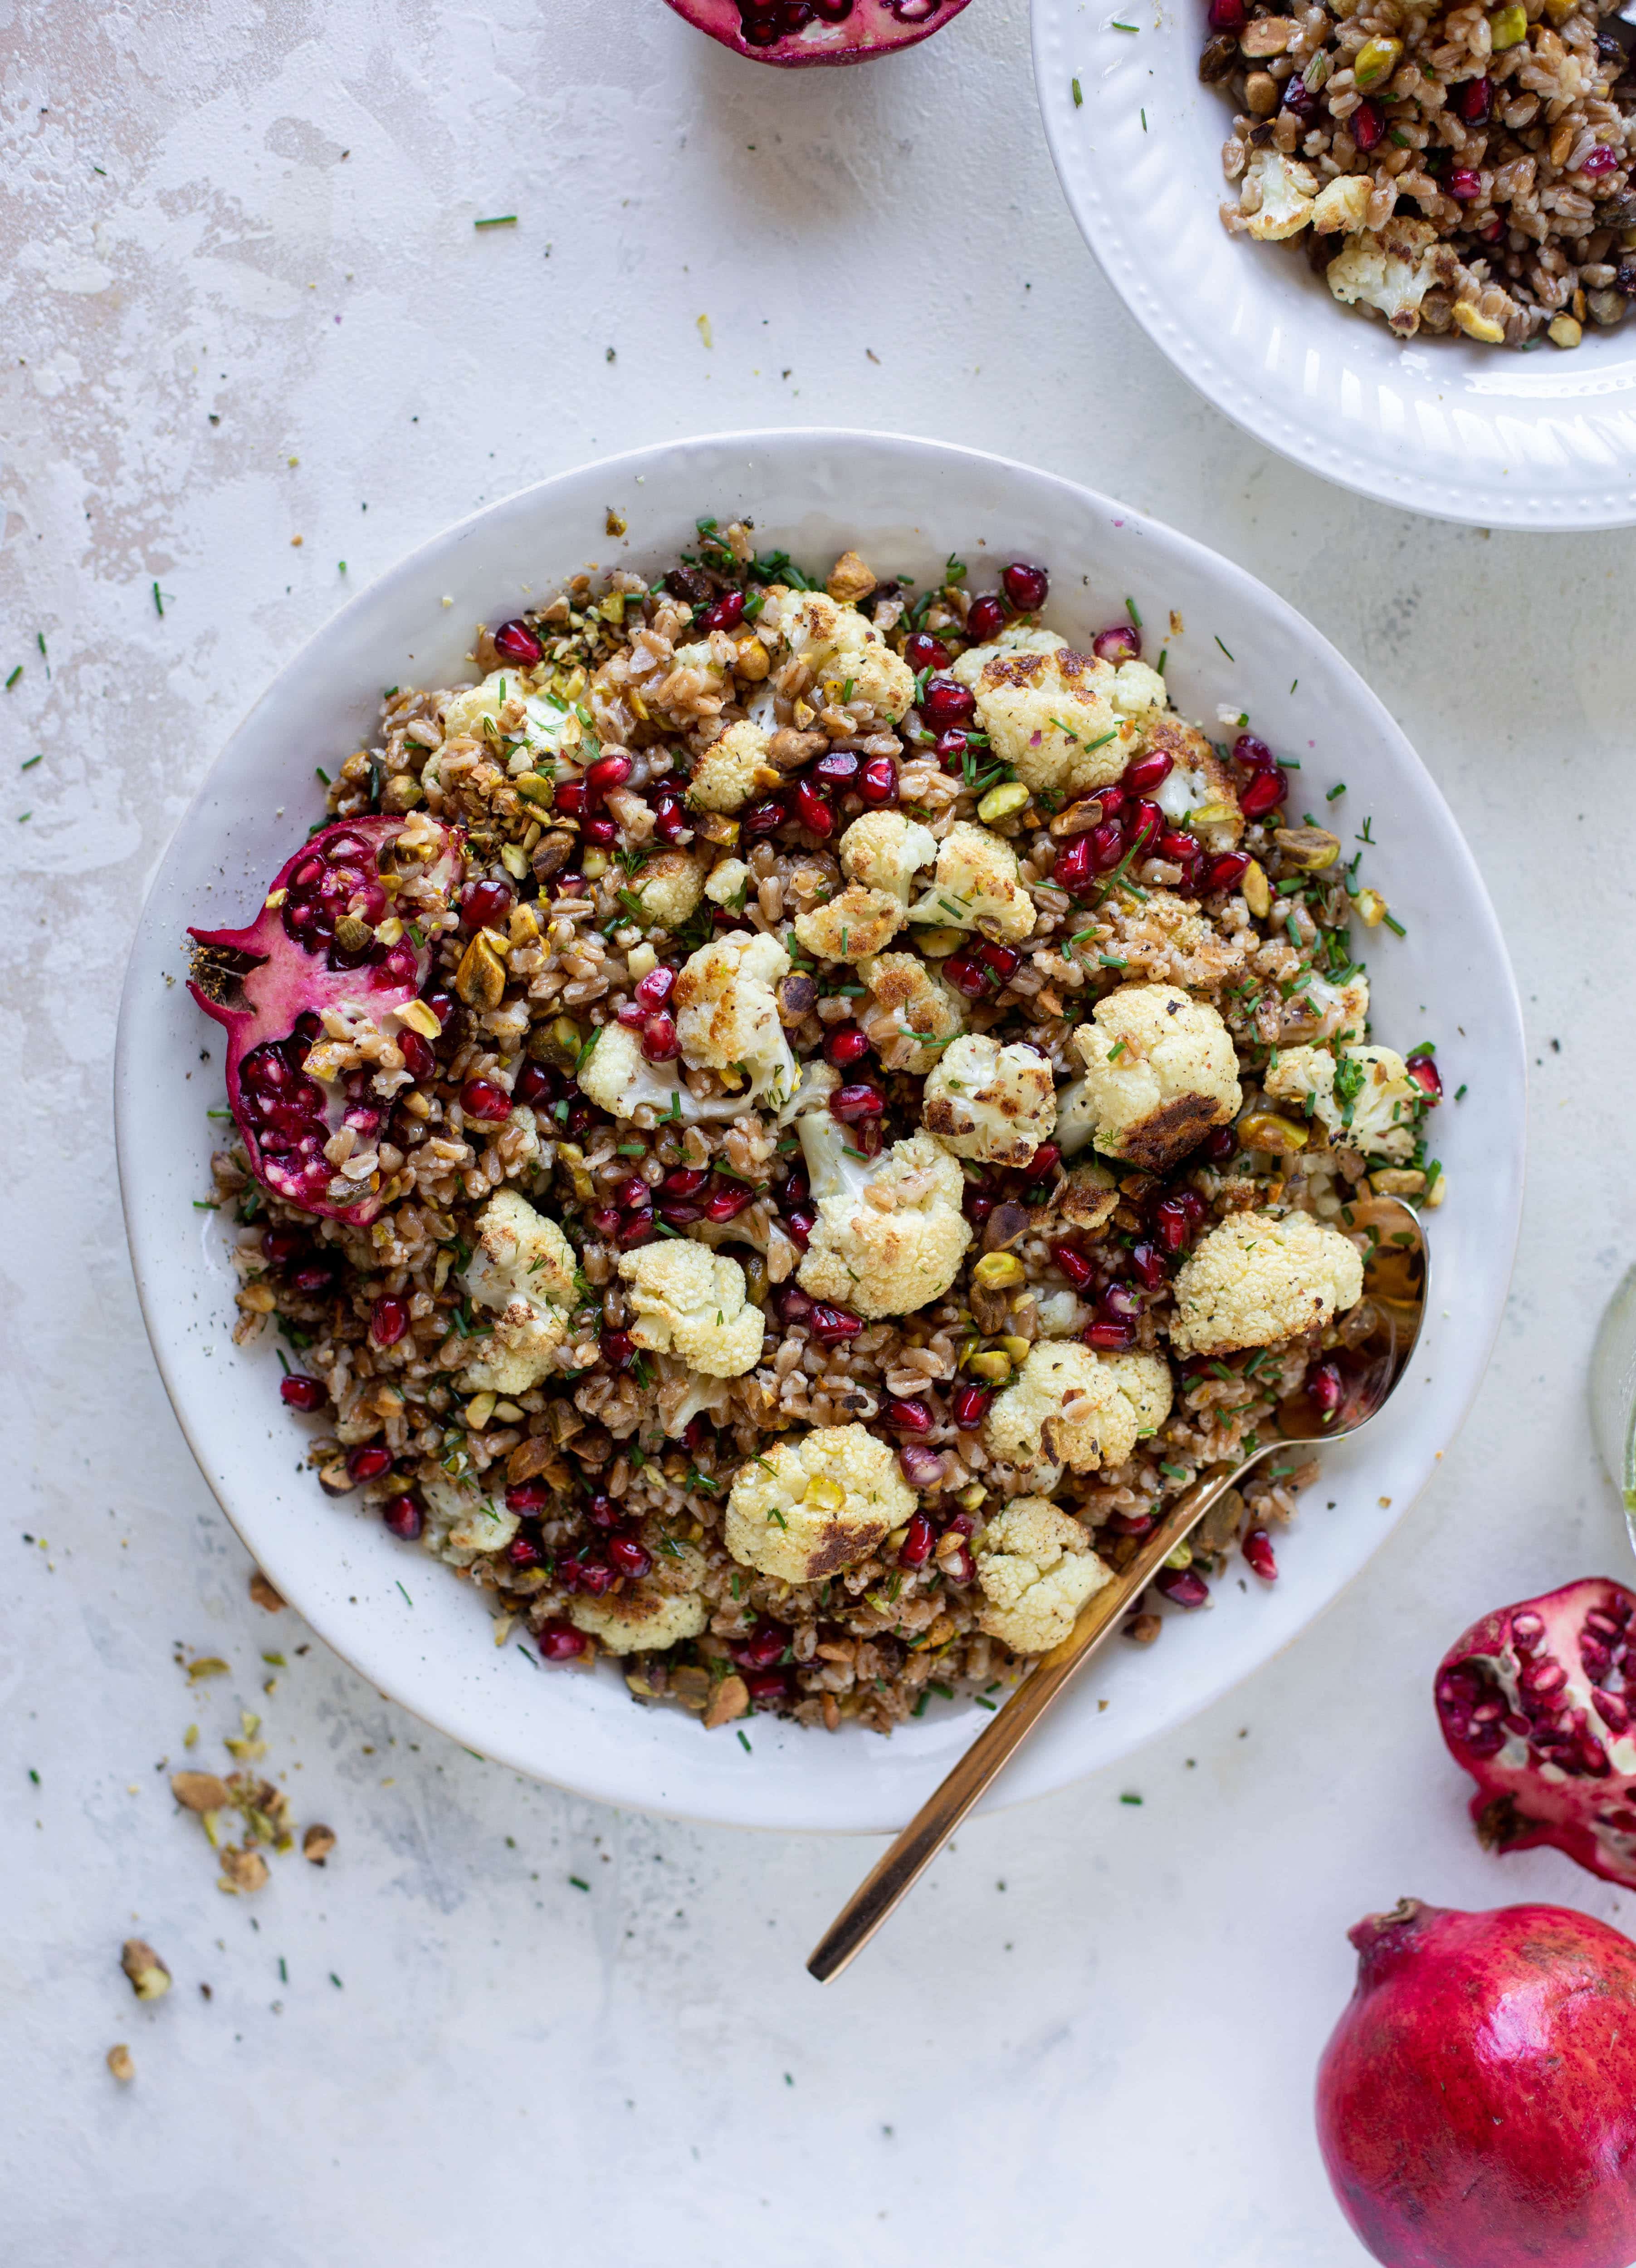 This cauliflower farro salad is filled with roasted cauliflower, pistachios, pomegranates and drizzled with a dill vinaigrette. Delicious!